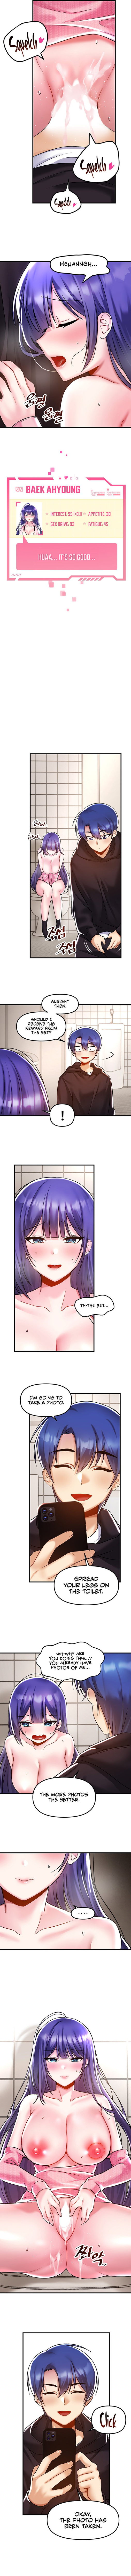 trapped-in-the-academys-eroge-chap-39-5